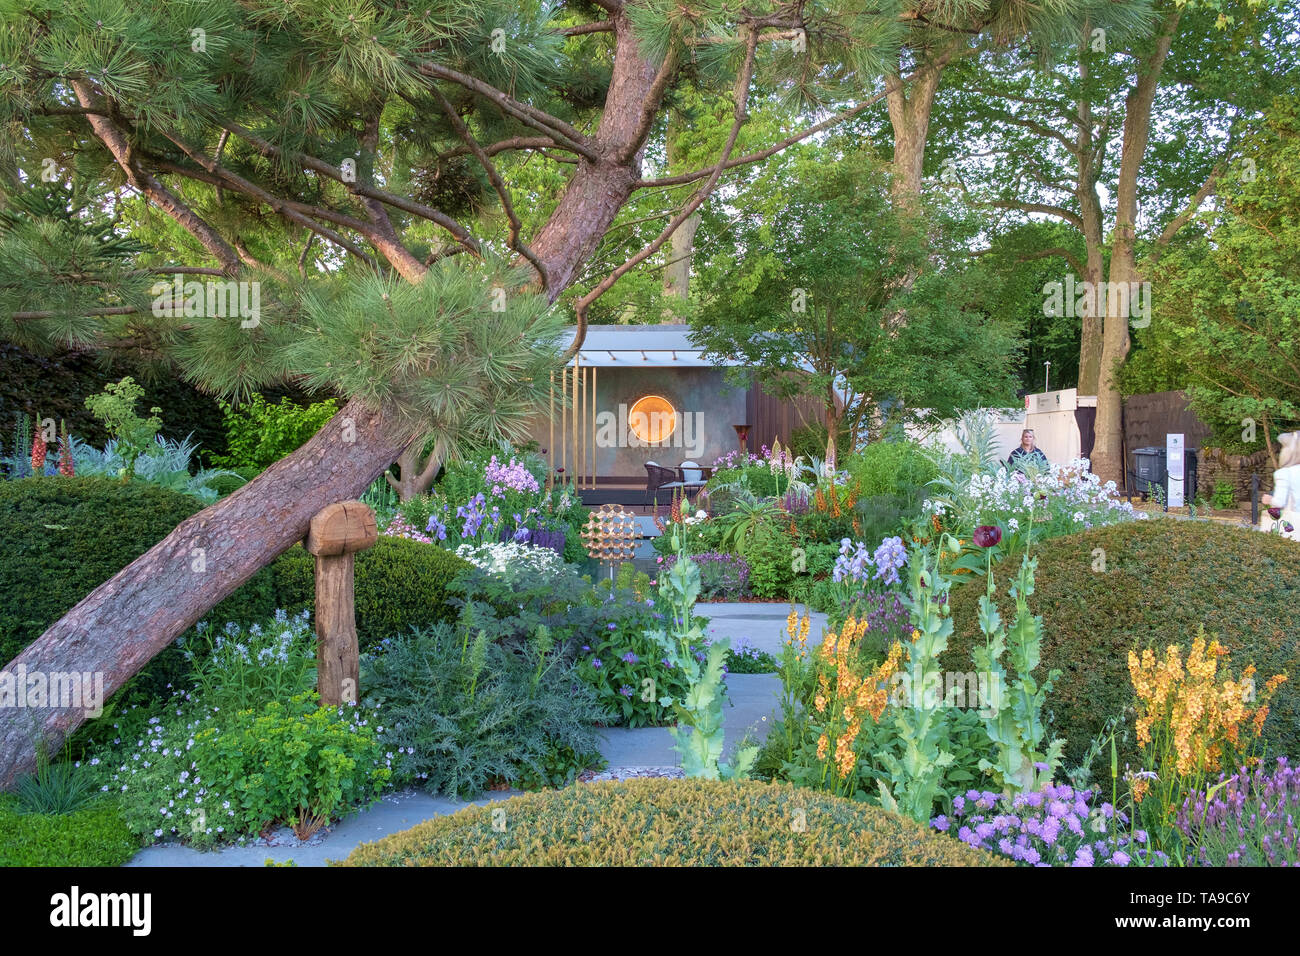 London, UK - May 22nd 2019: RHS Chelsea Flower Show, the Morgan Stanley Garden. A mixture of plants and architecture. Stock Photo